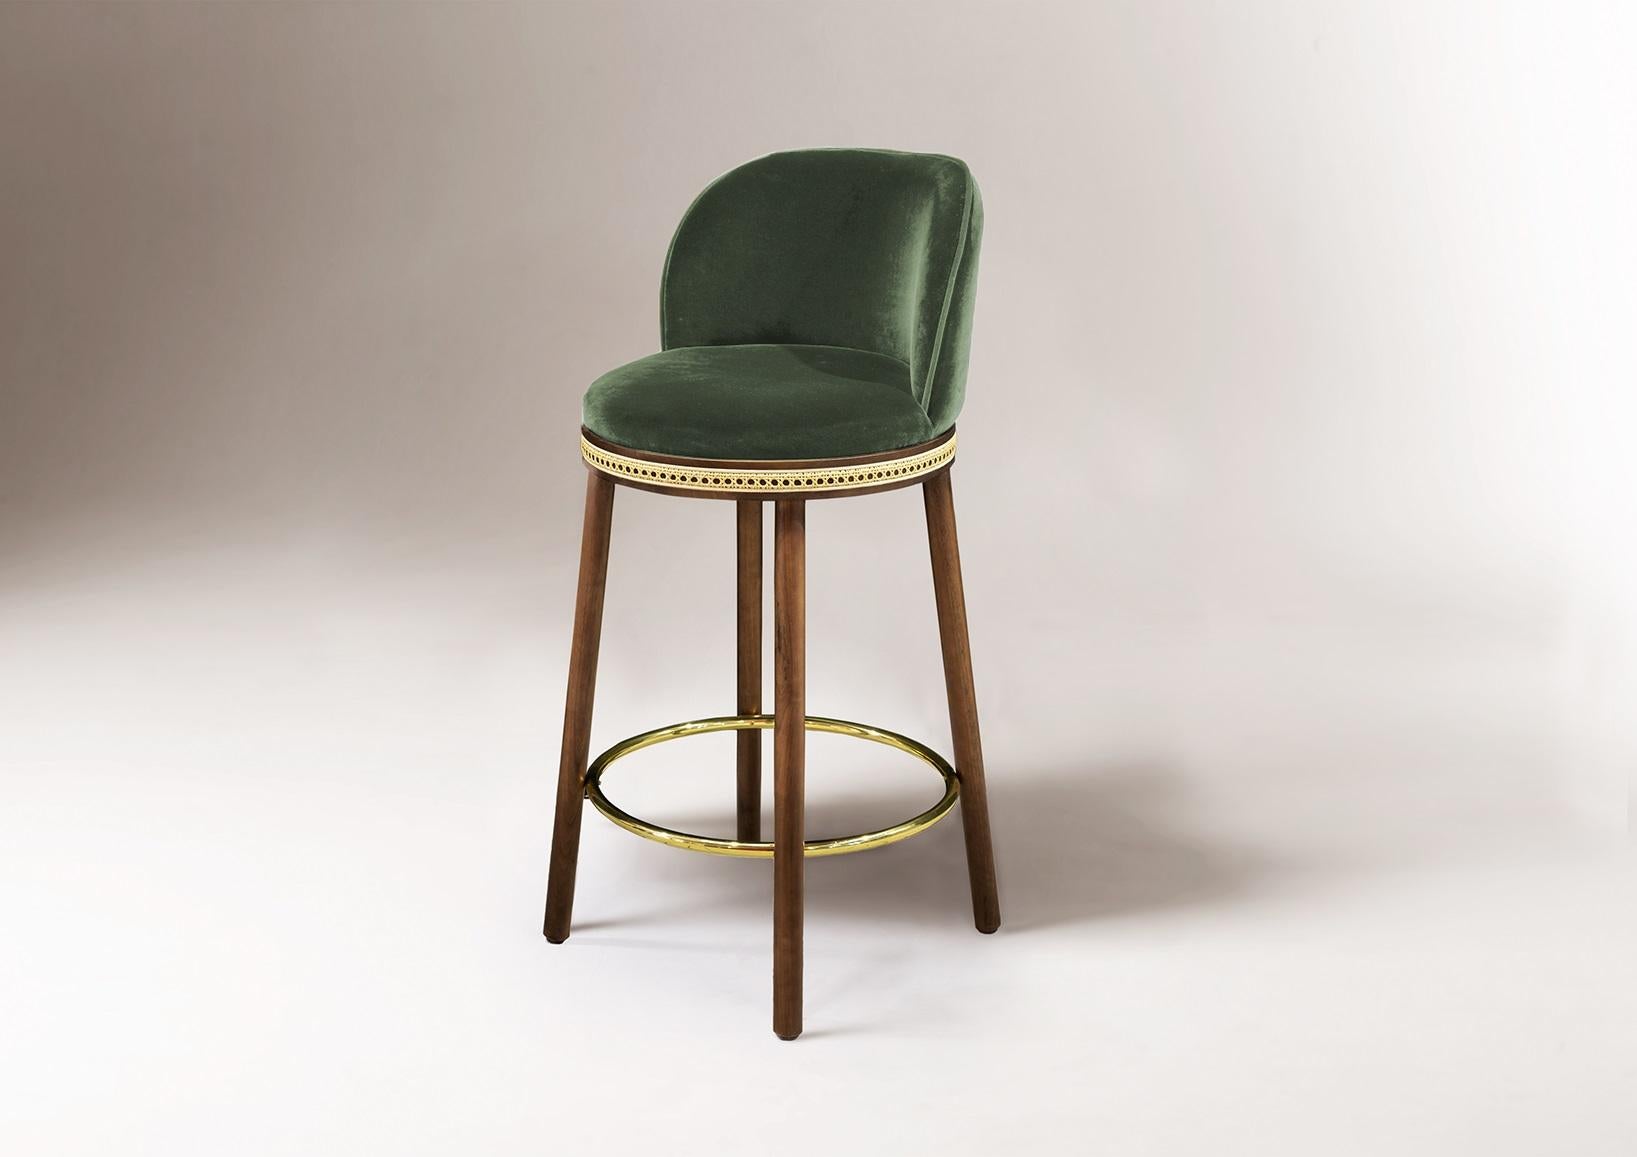 DOOQ Mid-Century Modern Counter Chair Alma with Green Velvet, Walnut and Brass

In a piece that combines classic and modern aesthetics we can find a certain harmonic gracefulness paired with an intimate voluptuousness that can embrace you and